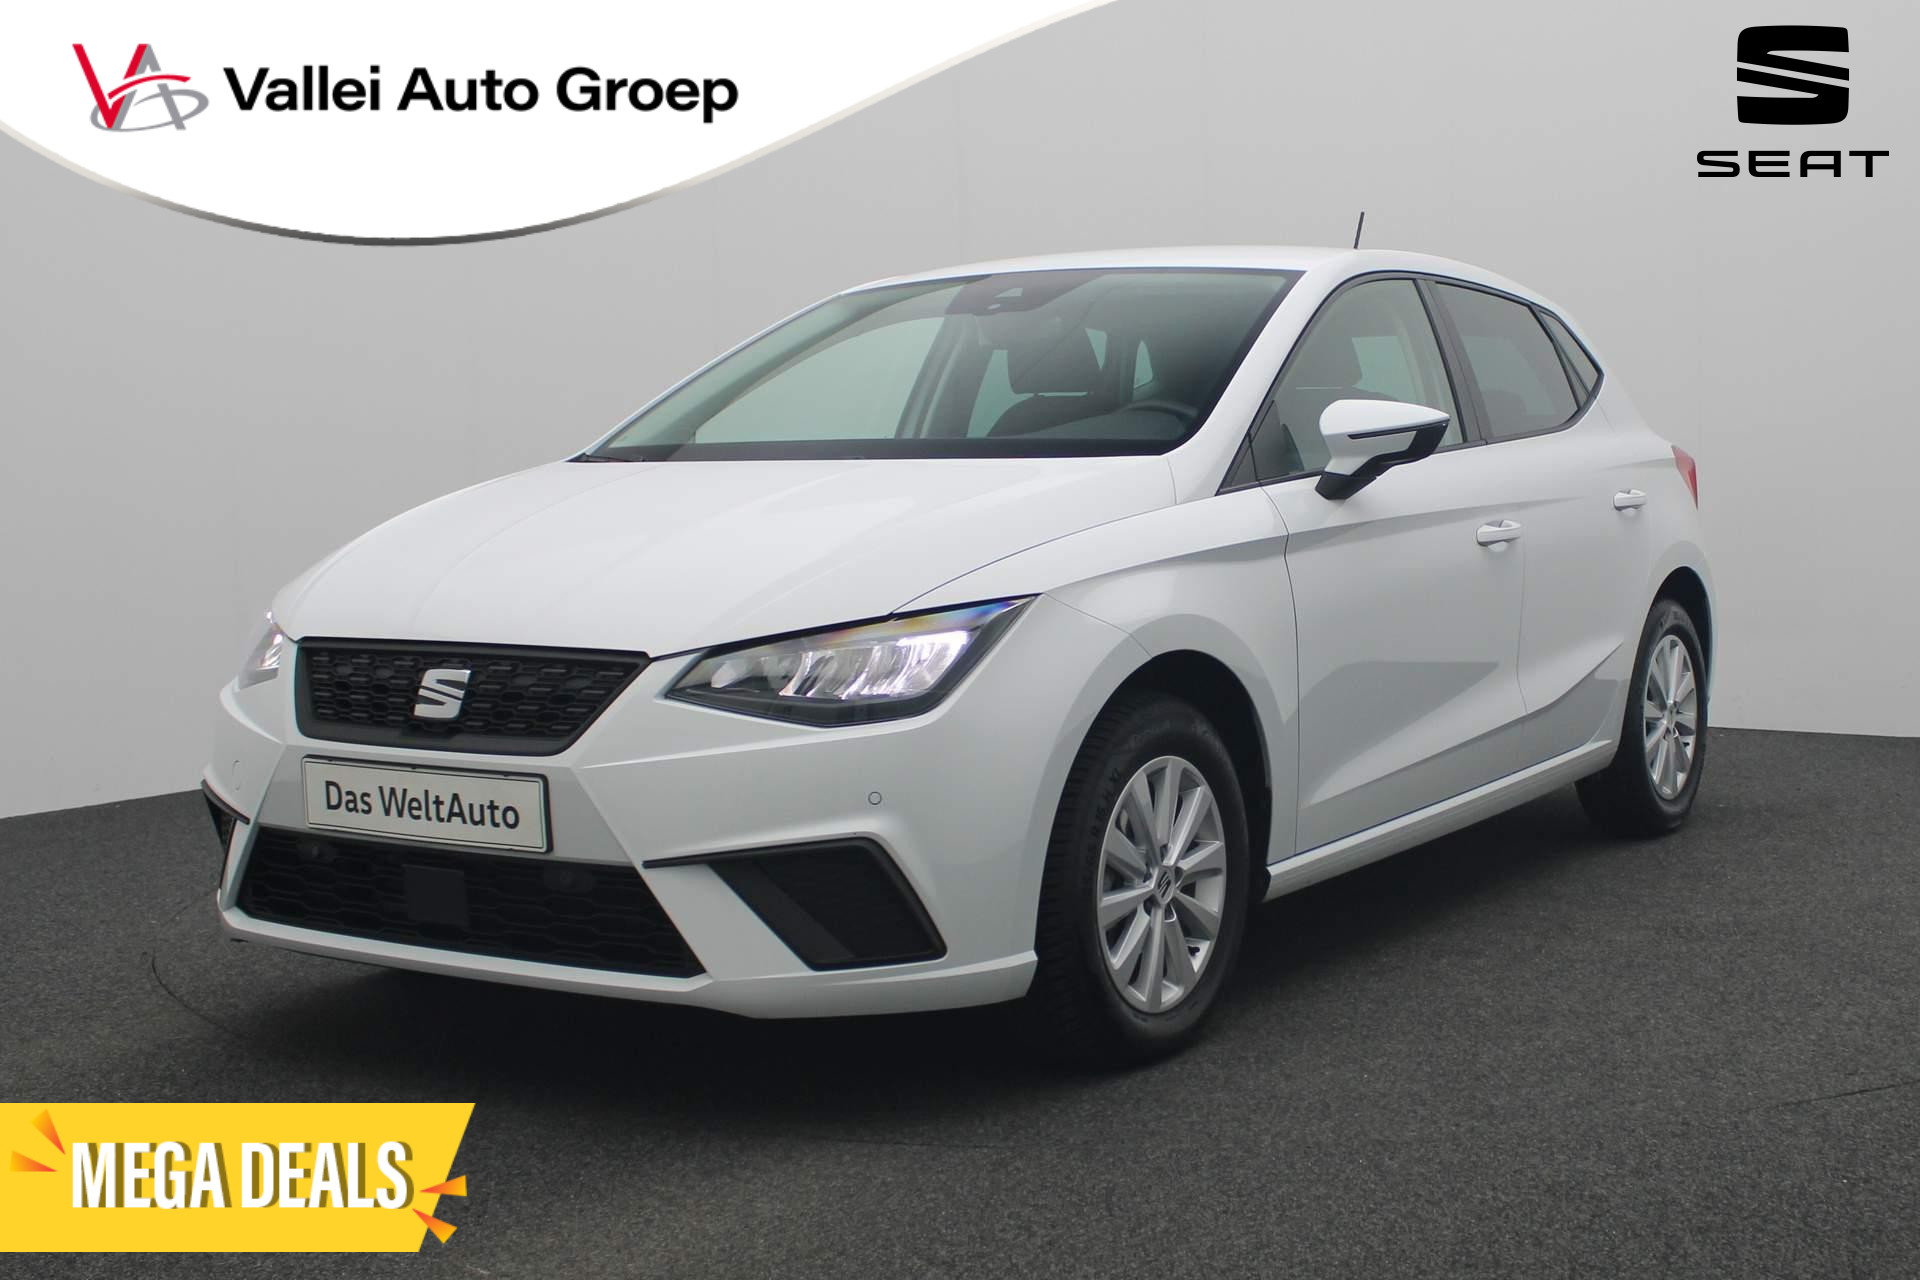 SEAT Ibiza 1.0 TSI 95PK Style Business Connect | Navi | Cruise | Clima | Parkeersensoren voor/achter | 15 inch